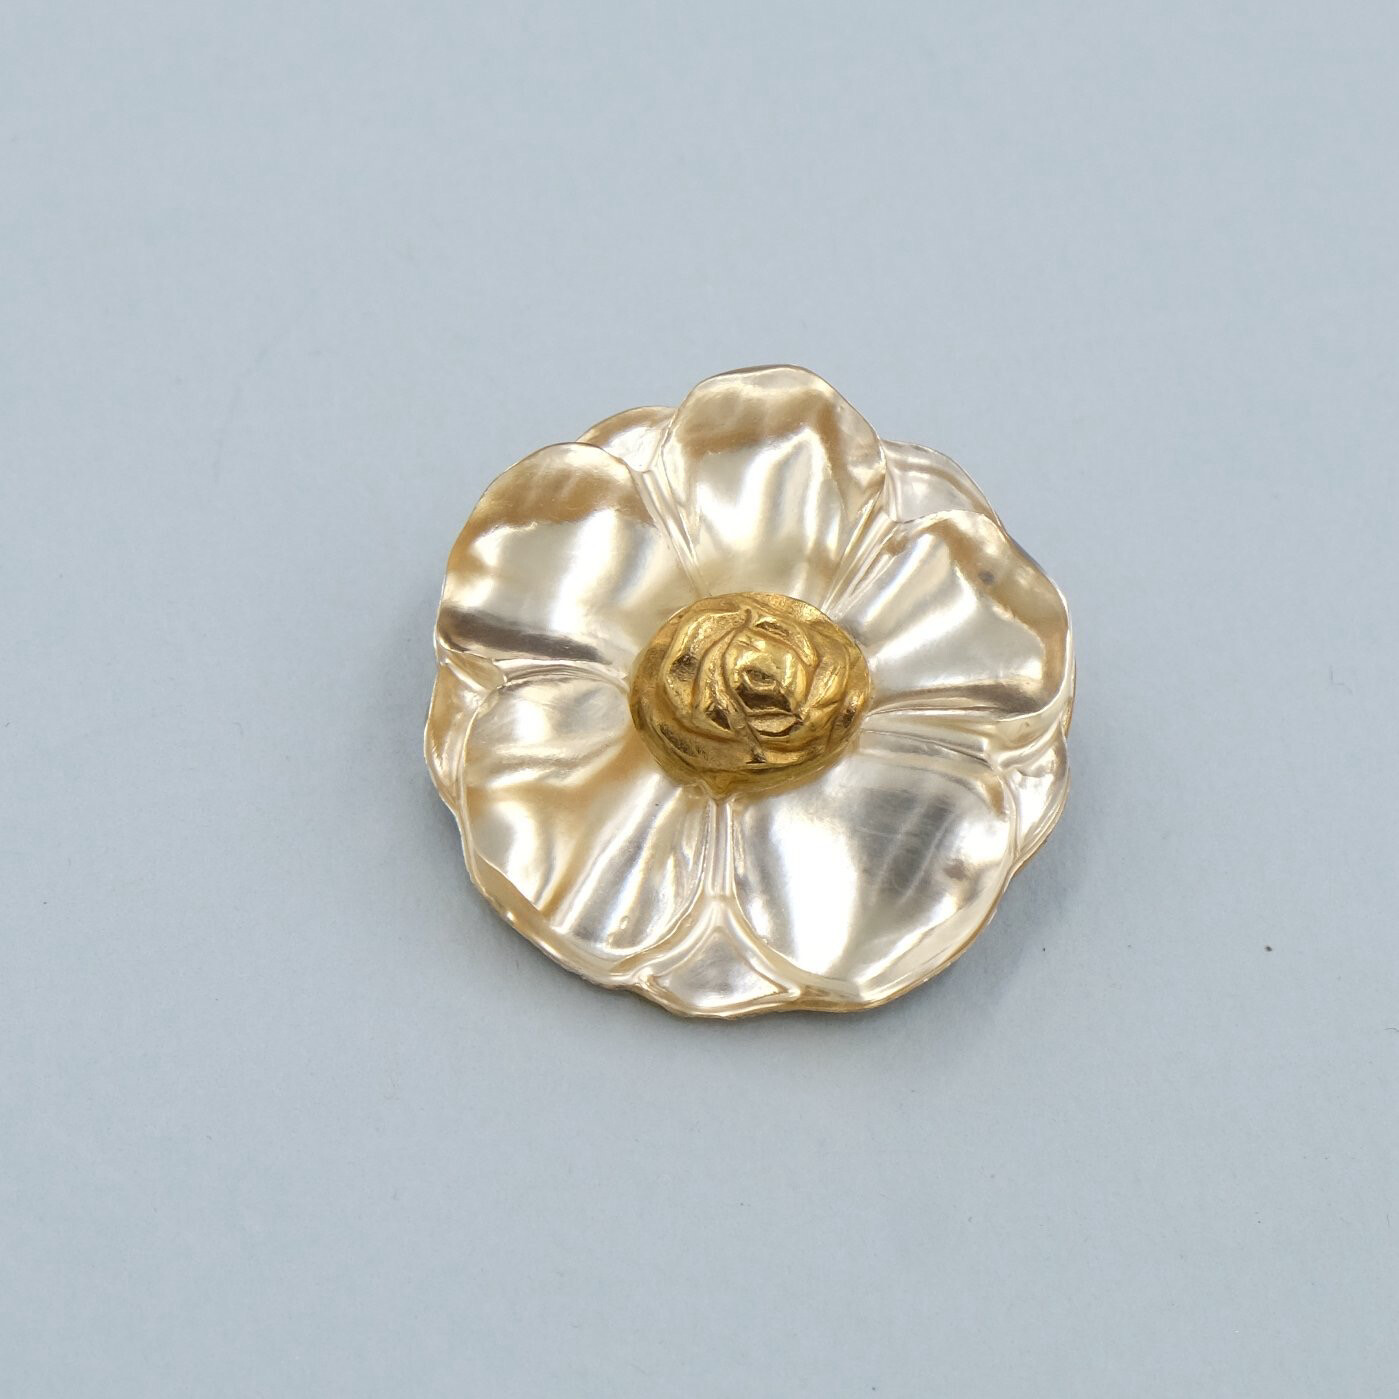 Vintage Kenzo Flower Pin and Pendant